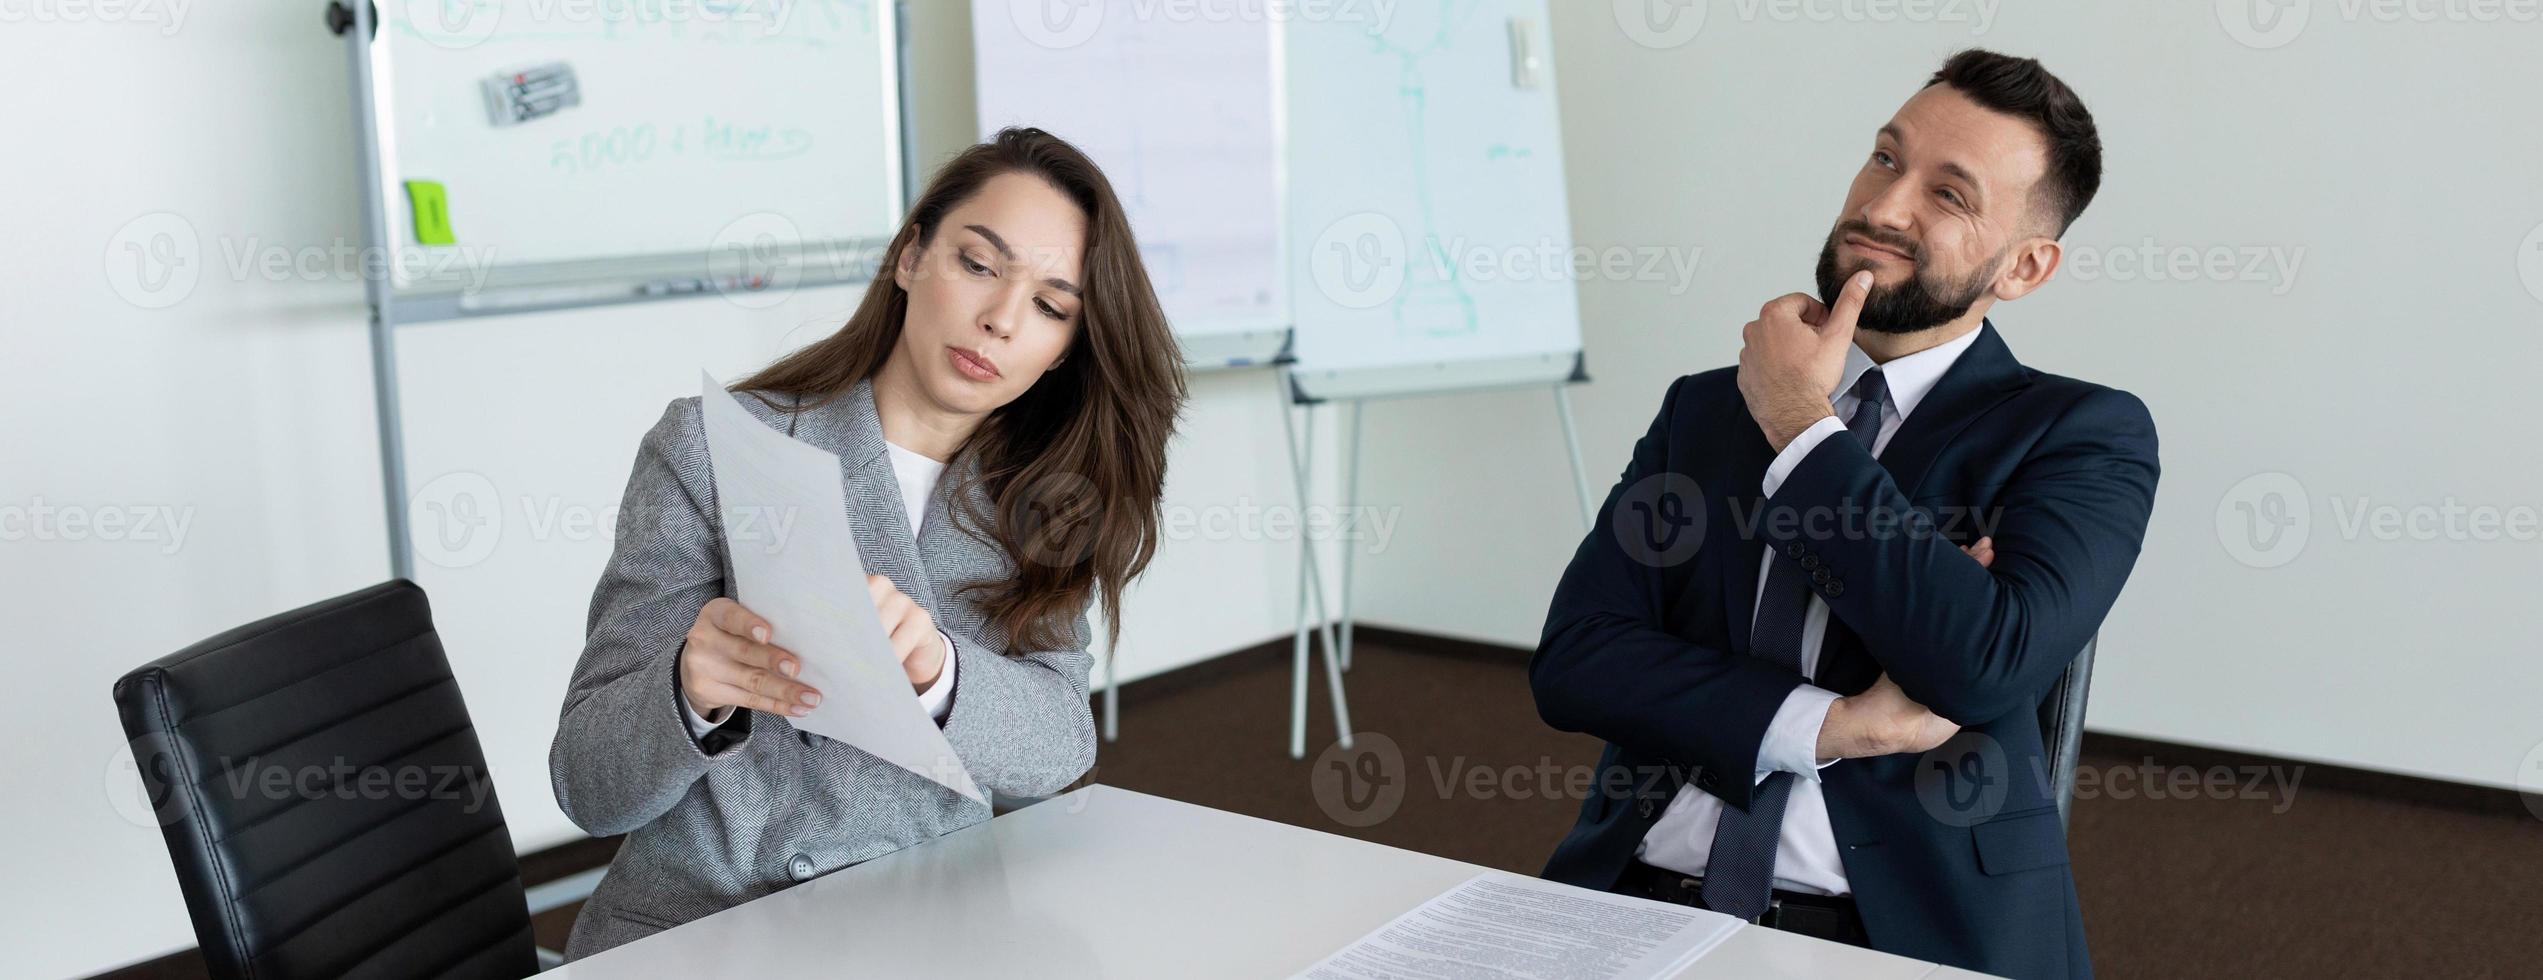 presentation of an employee when applying for a job for an interview photo